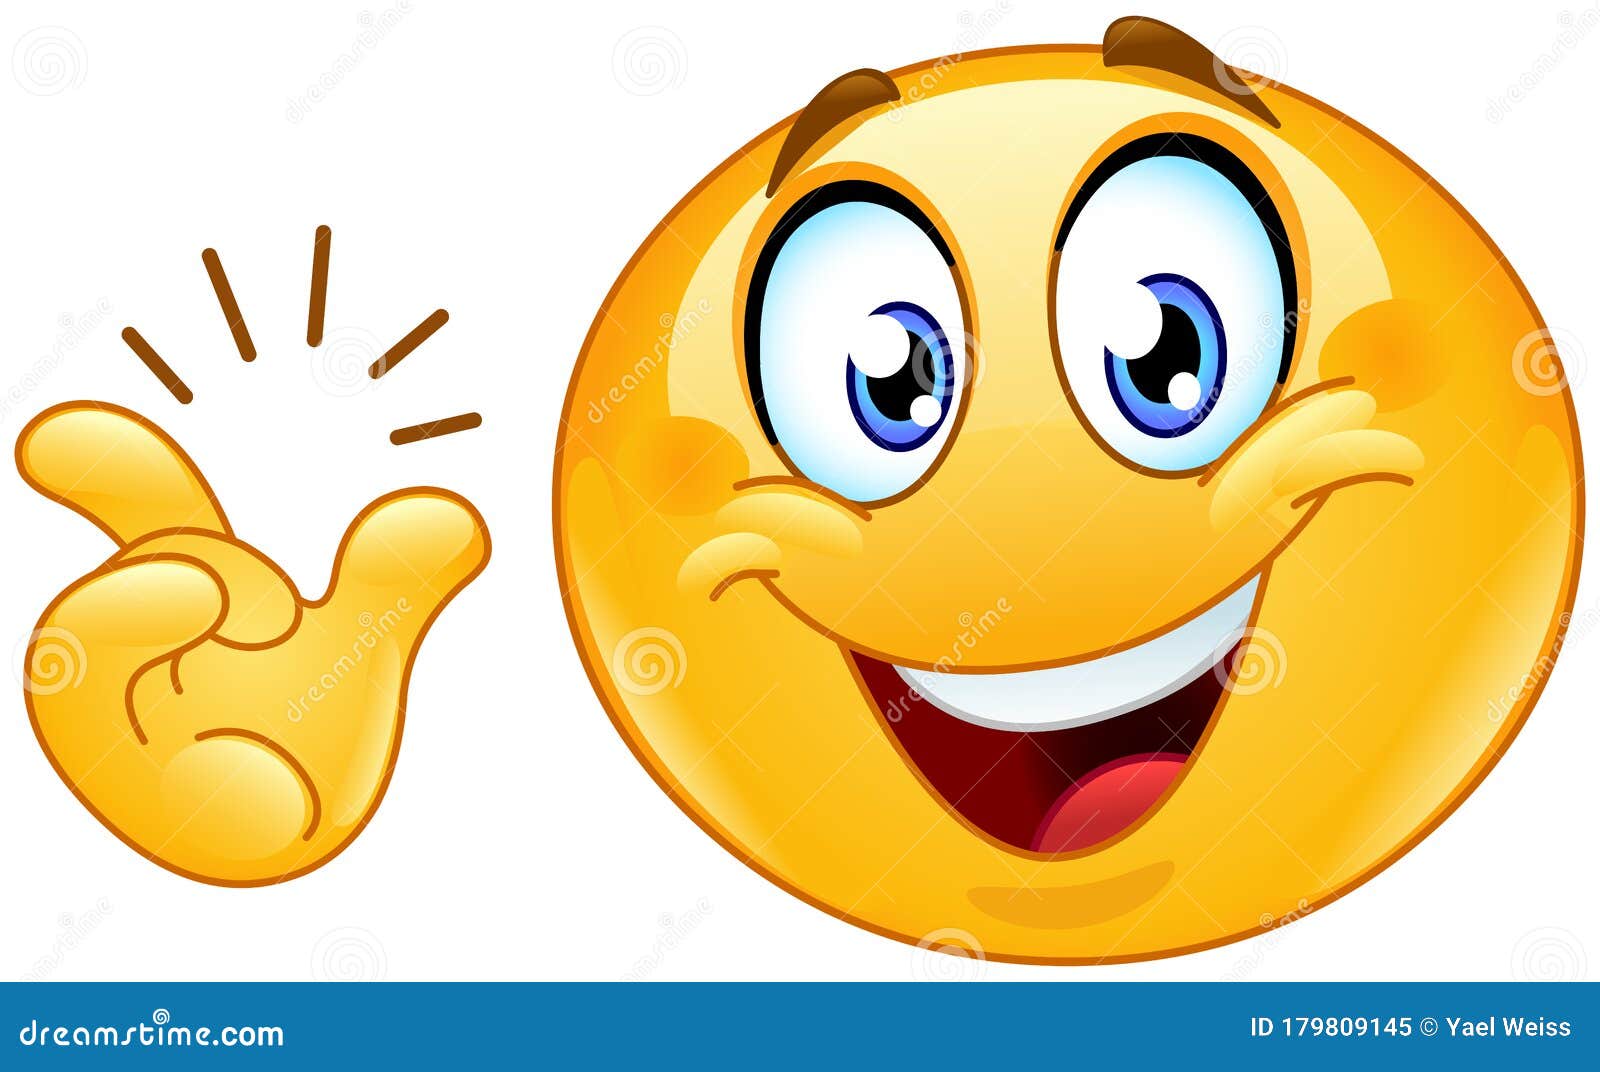 Easy emoticon stock vector. Illustration of people, funny - 179809145